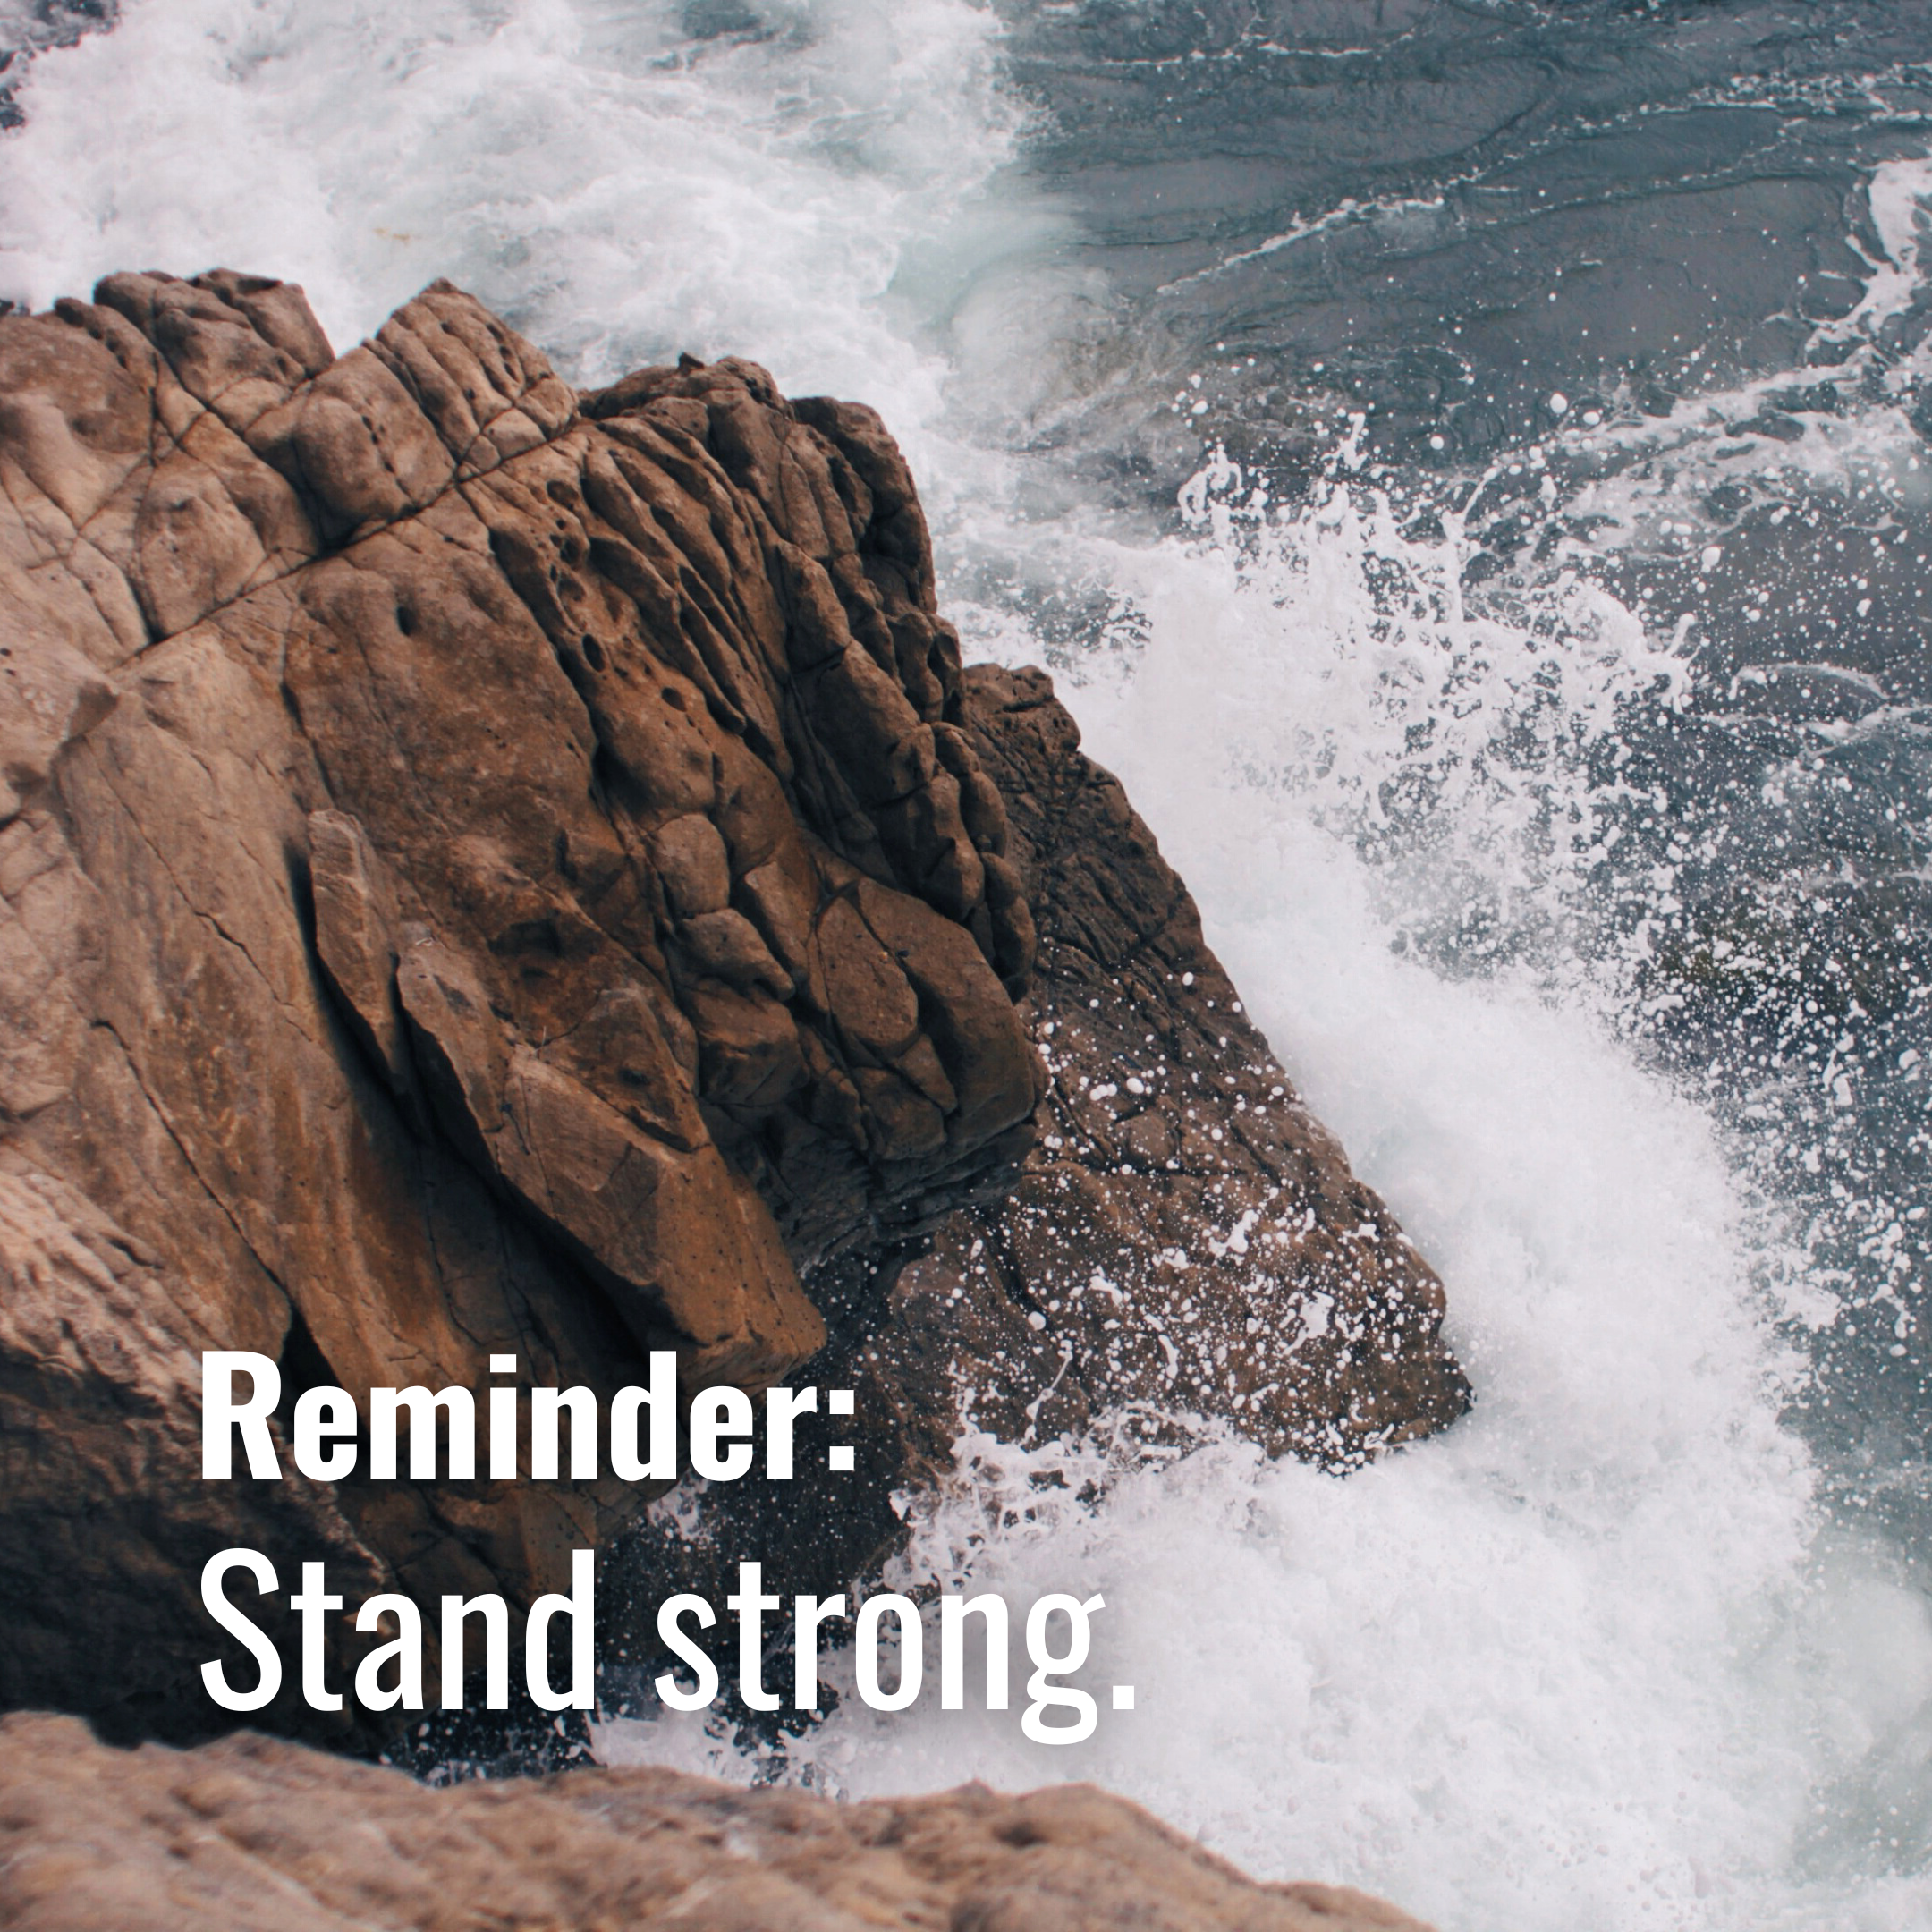 Stand strong.